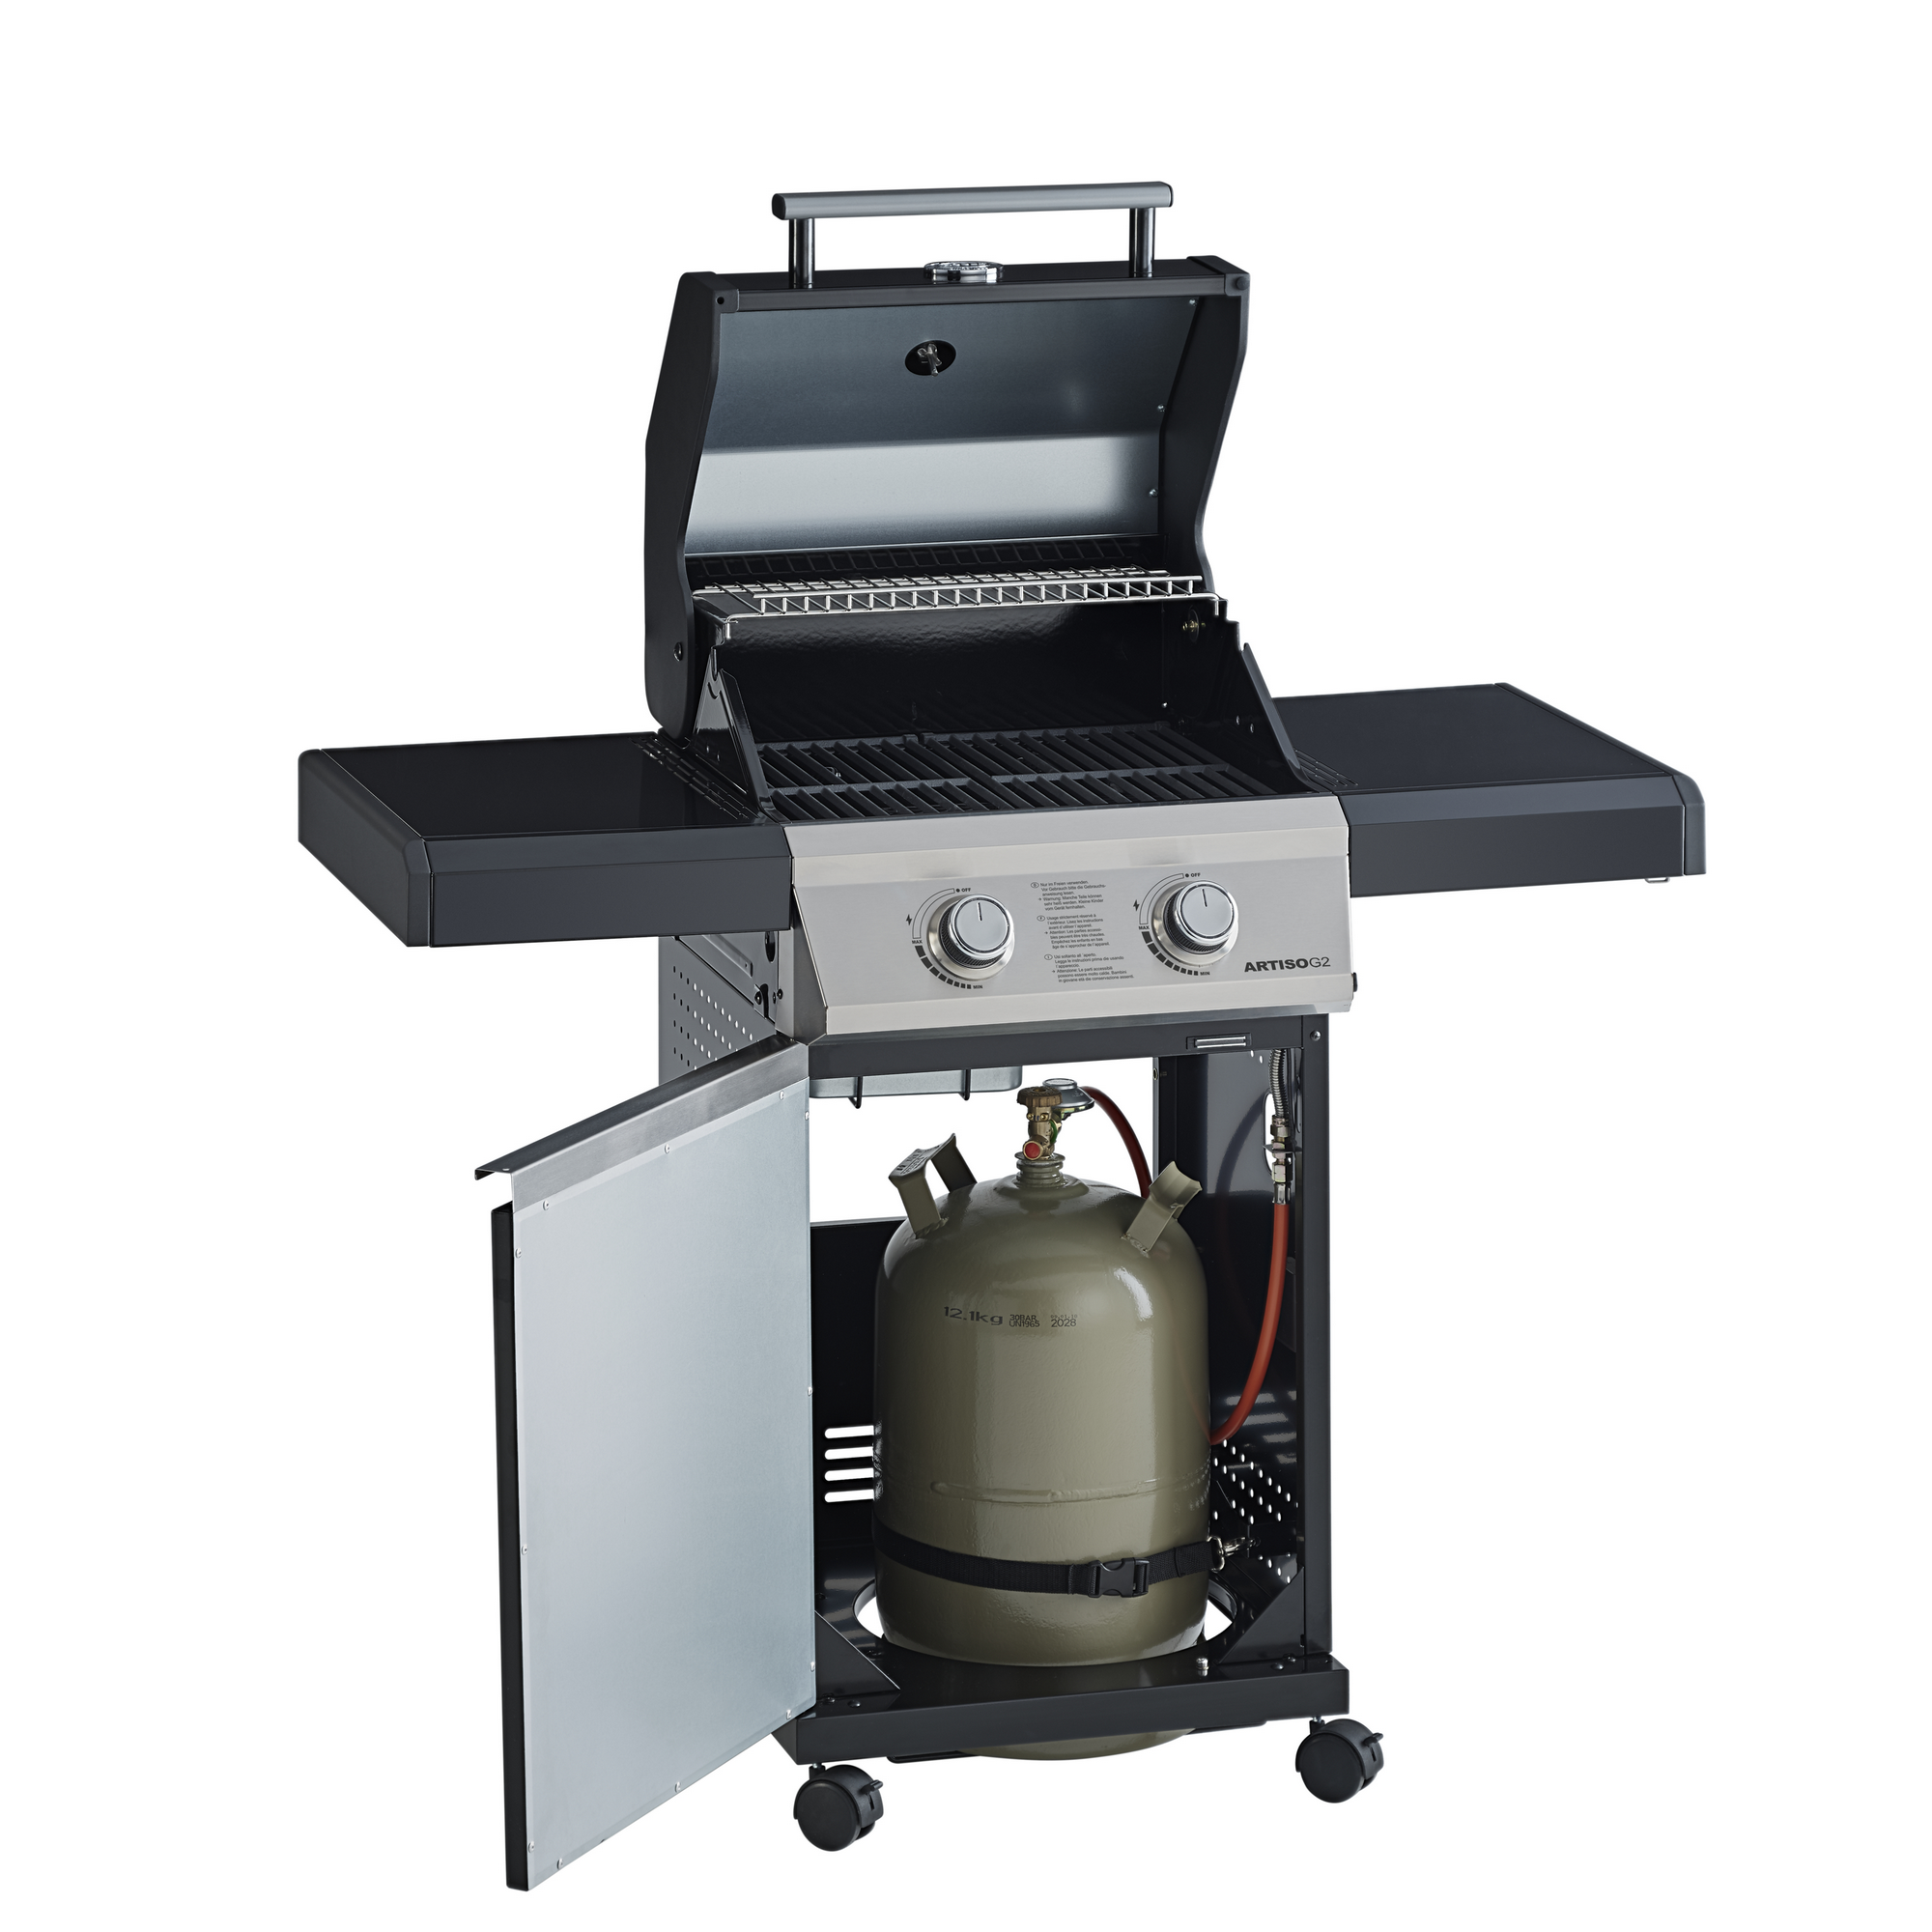 BBQ-Station 'Artiso G2' schwarz + product picture